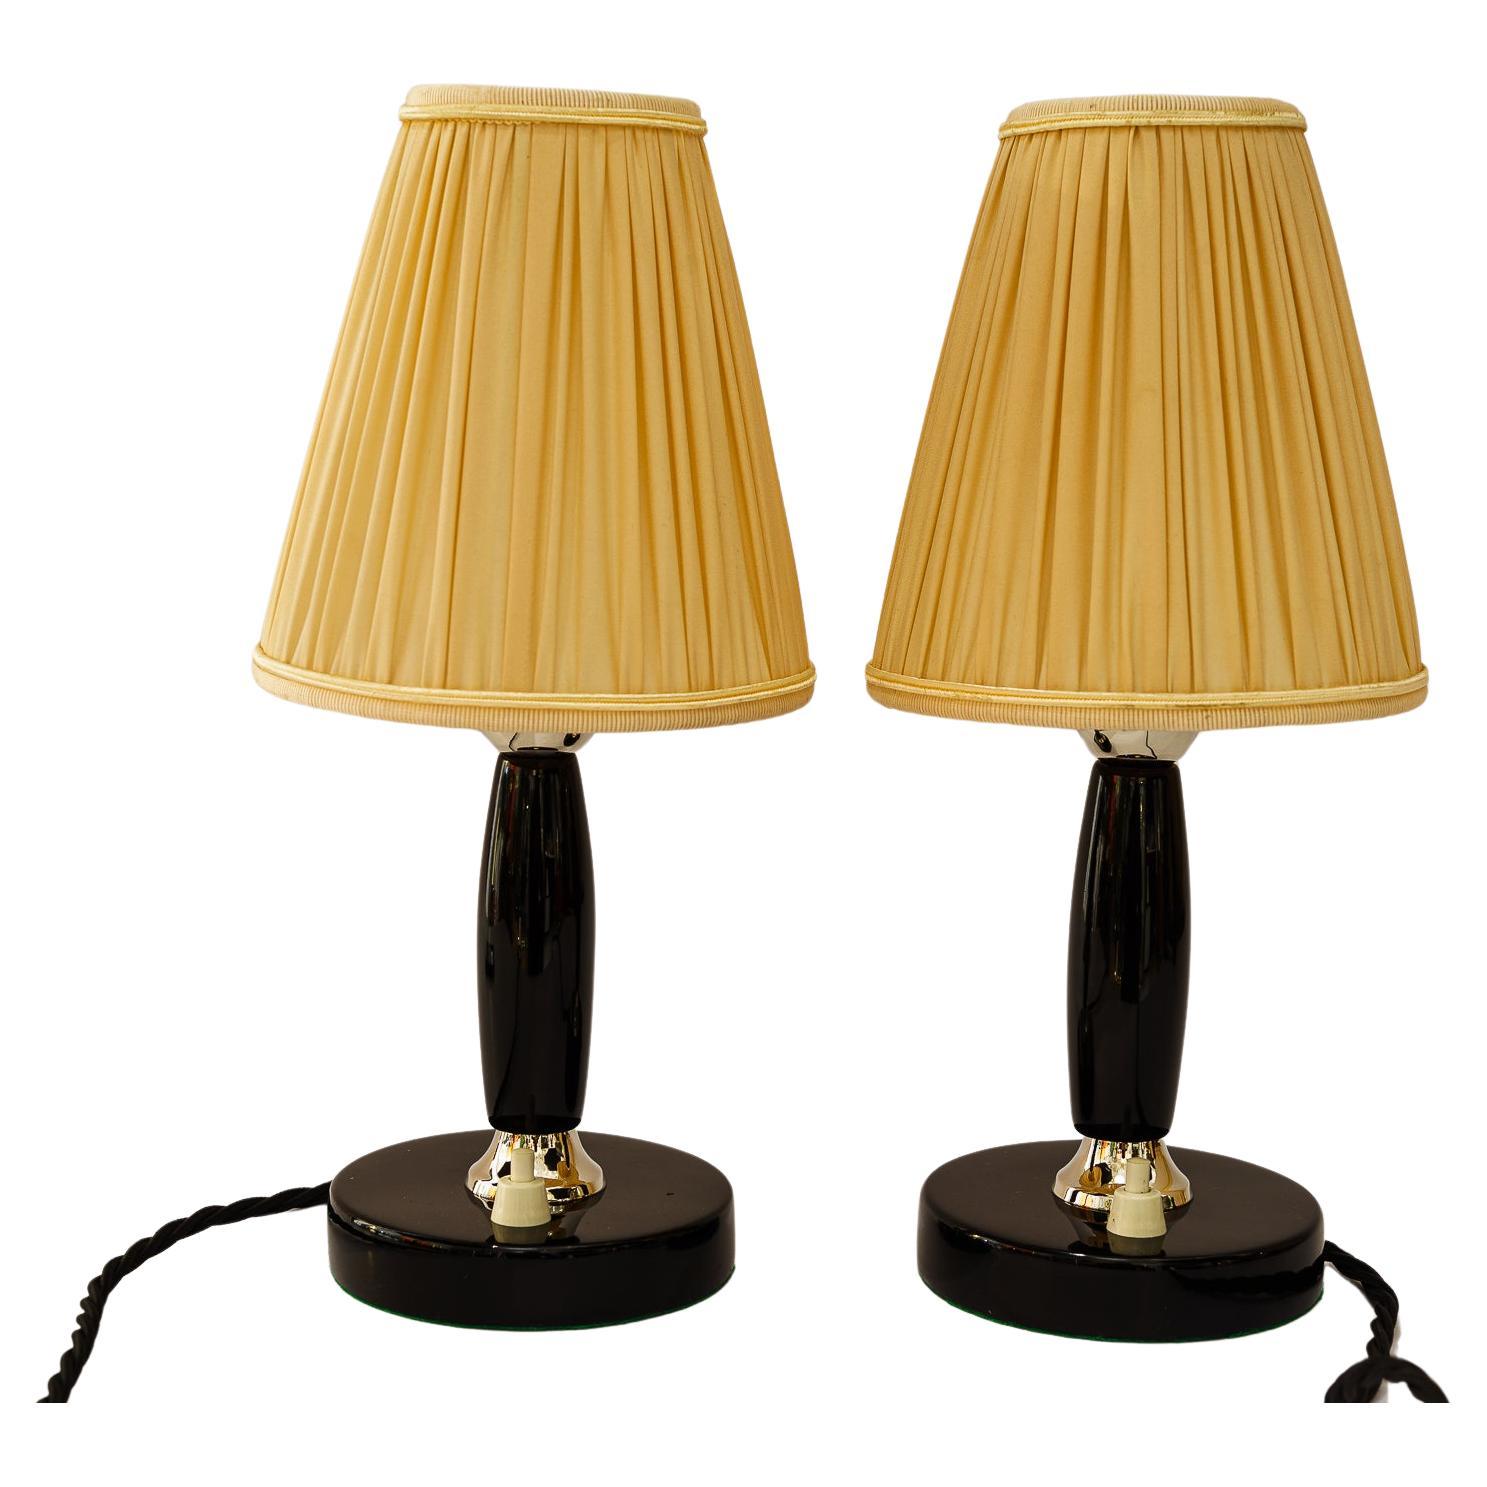 2x Art Deco Table Lamps vienna around 1930s wood polished and fabric shade For Sale